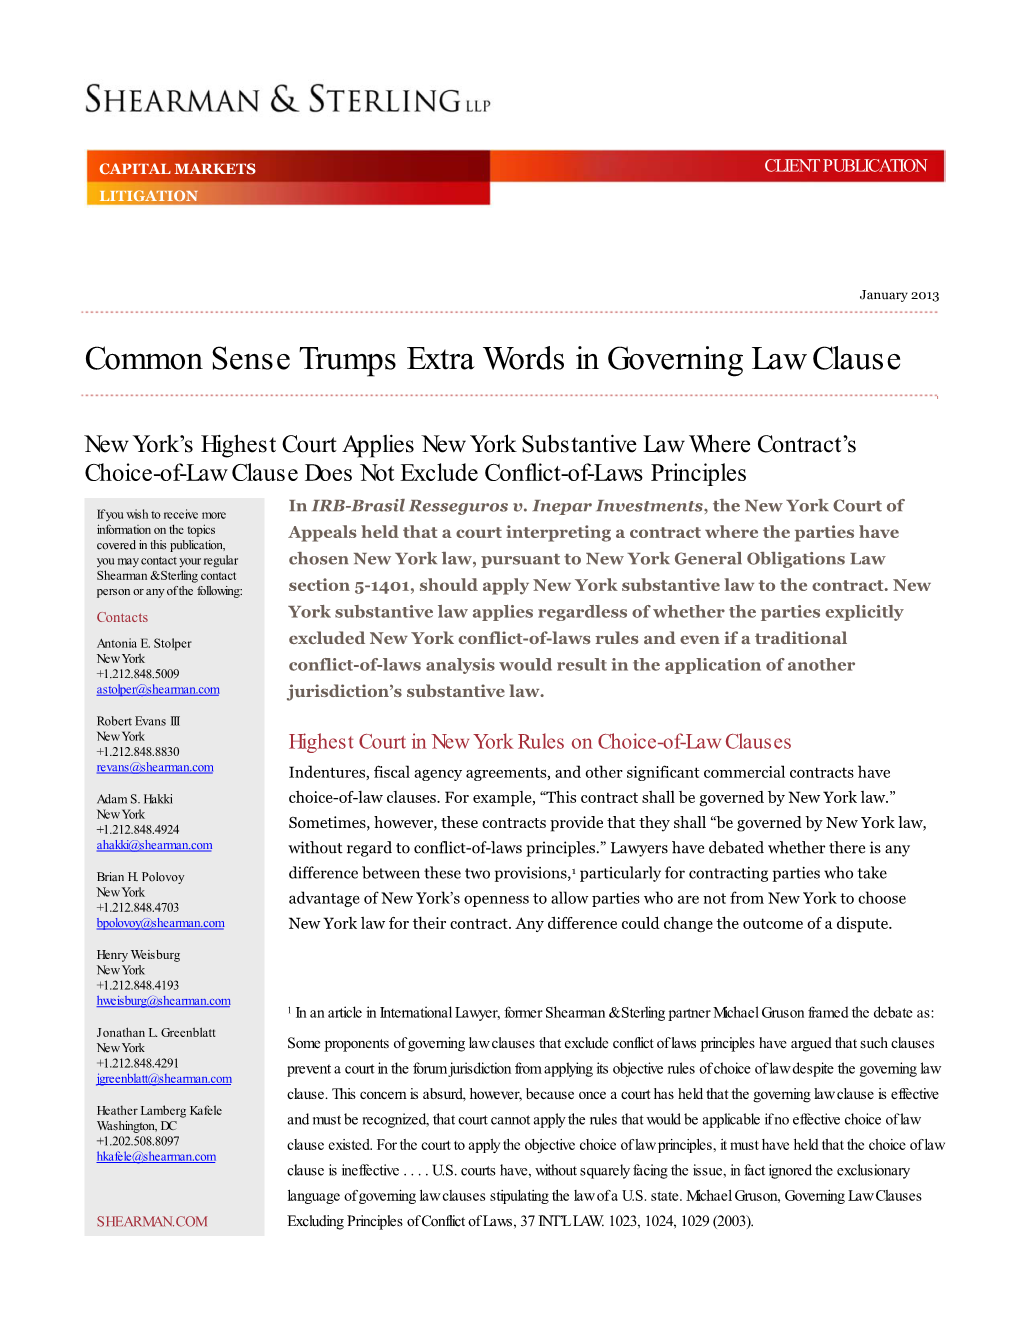 Common Sense Trumps Extra Words in Governing Law Clause